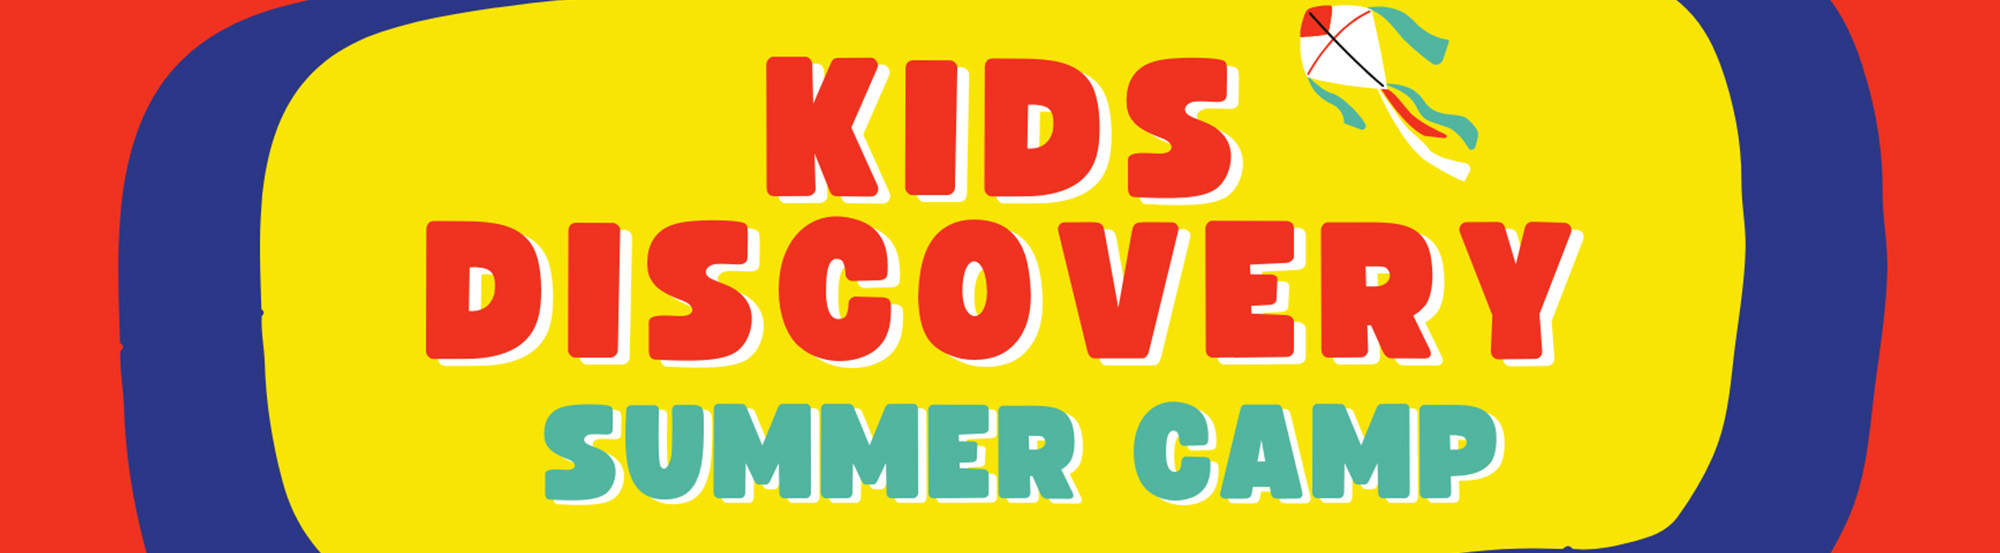 Kids Discovery Summer Camp